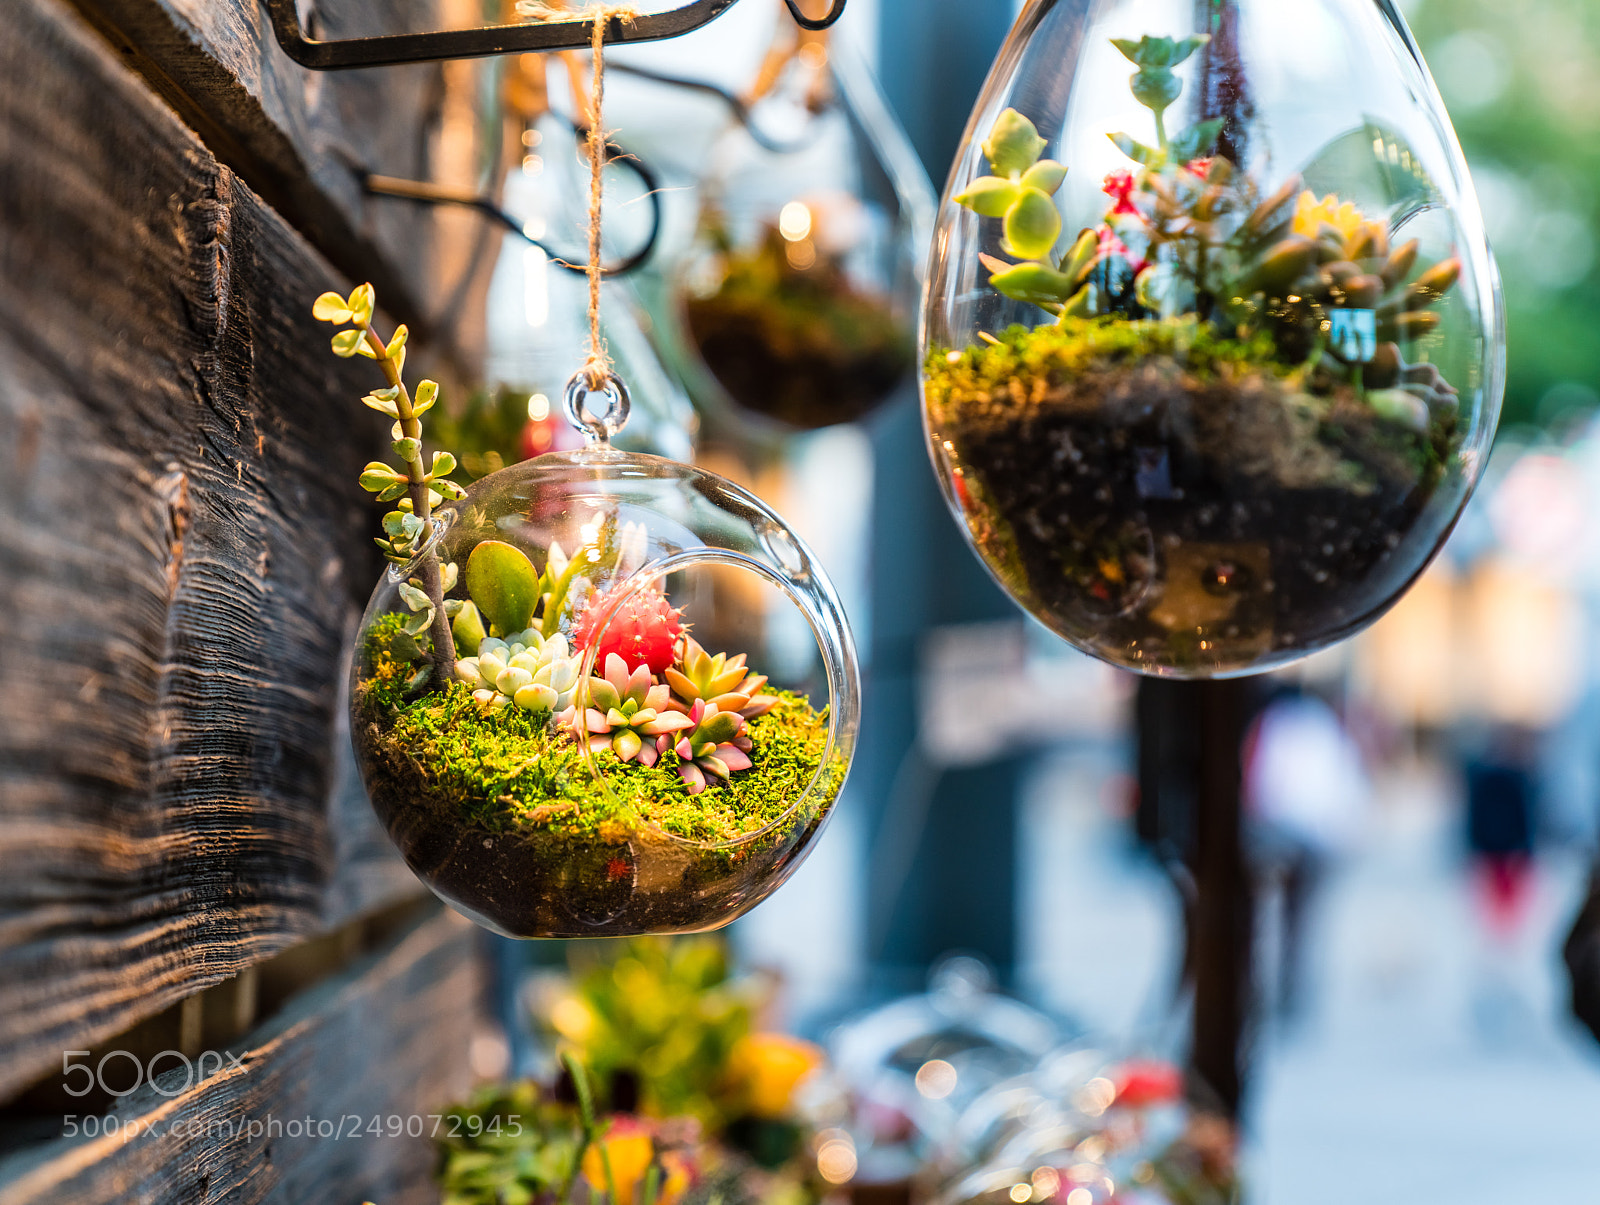 Sony a7R III sample photo. Glass hanging planter photography